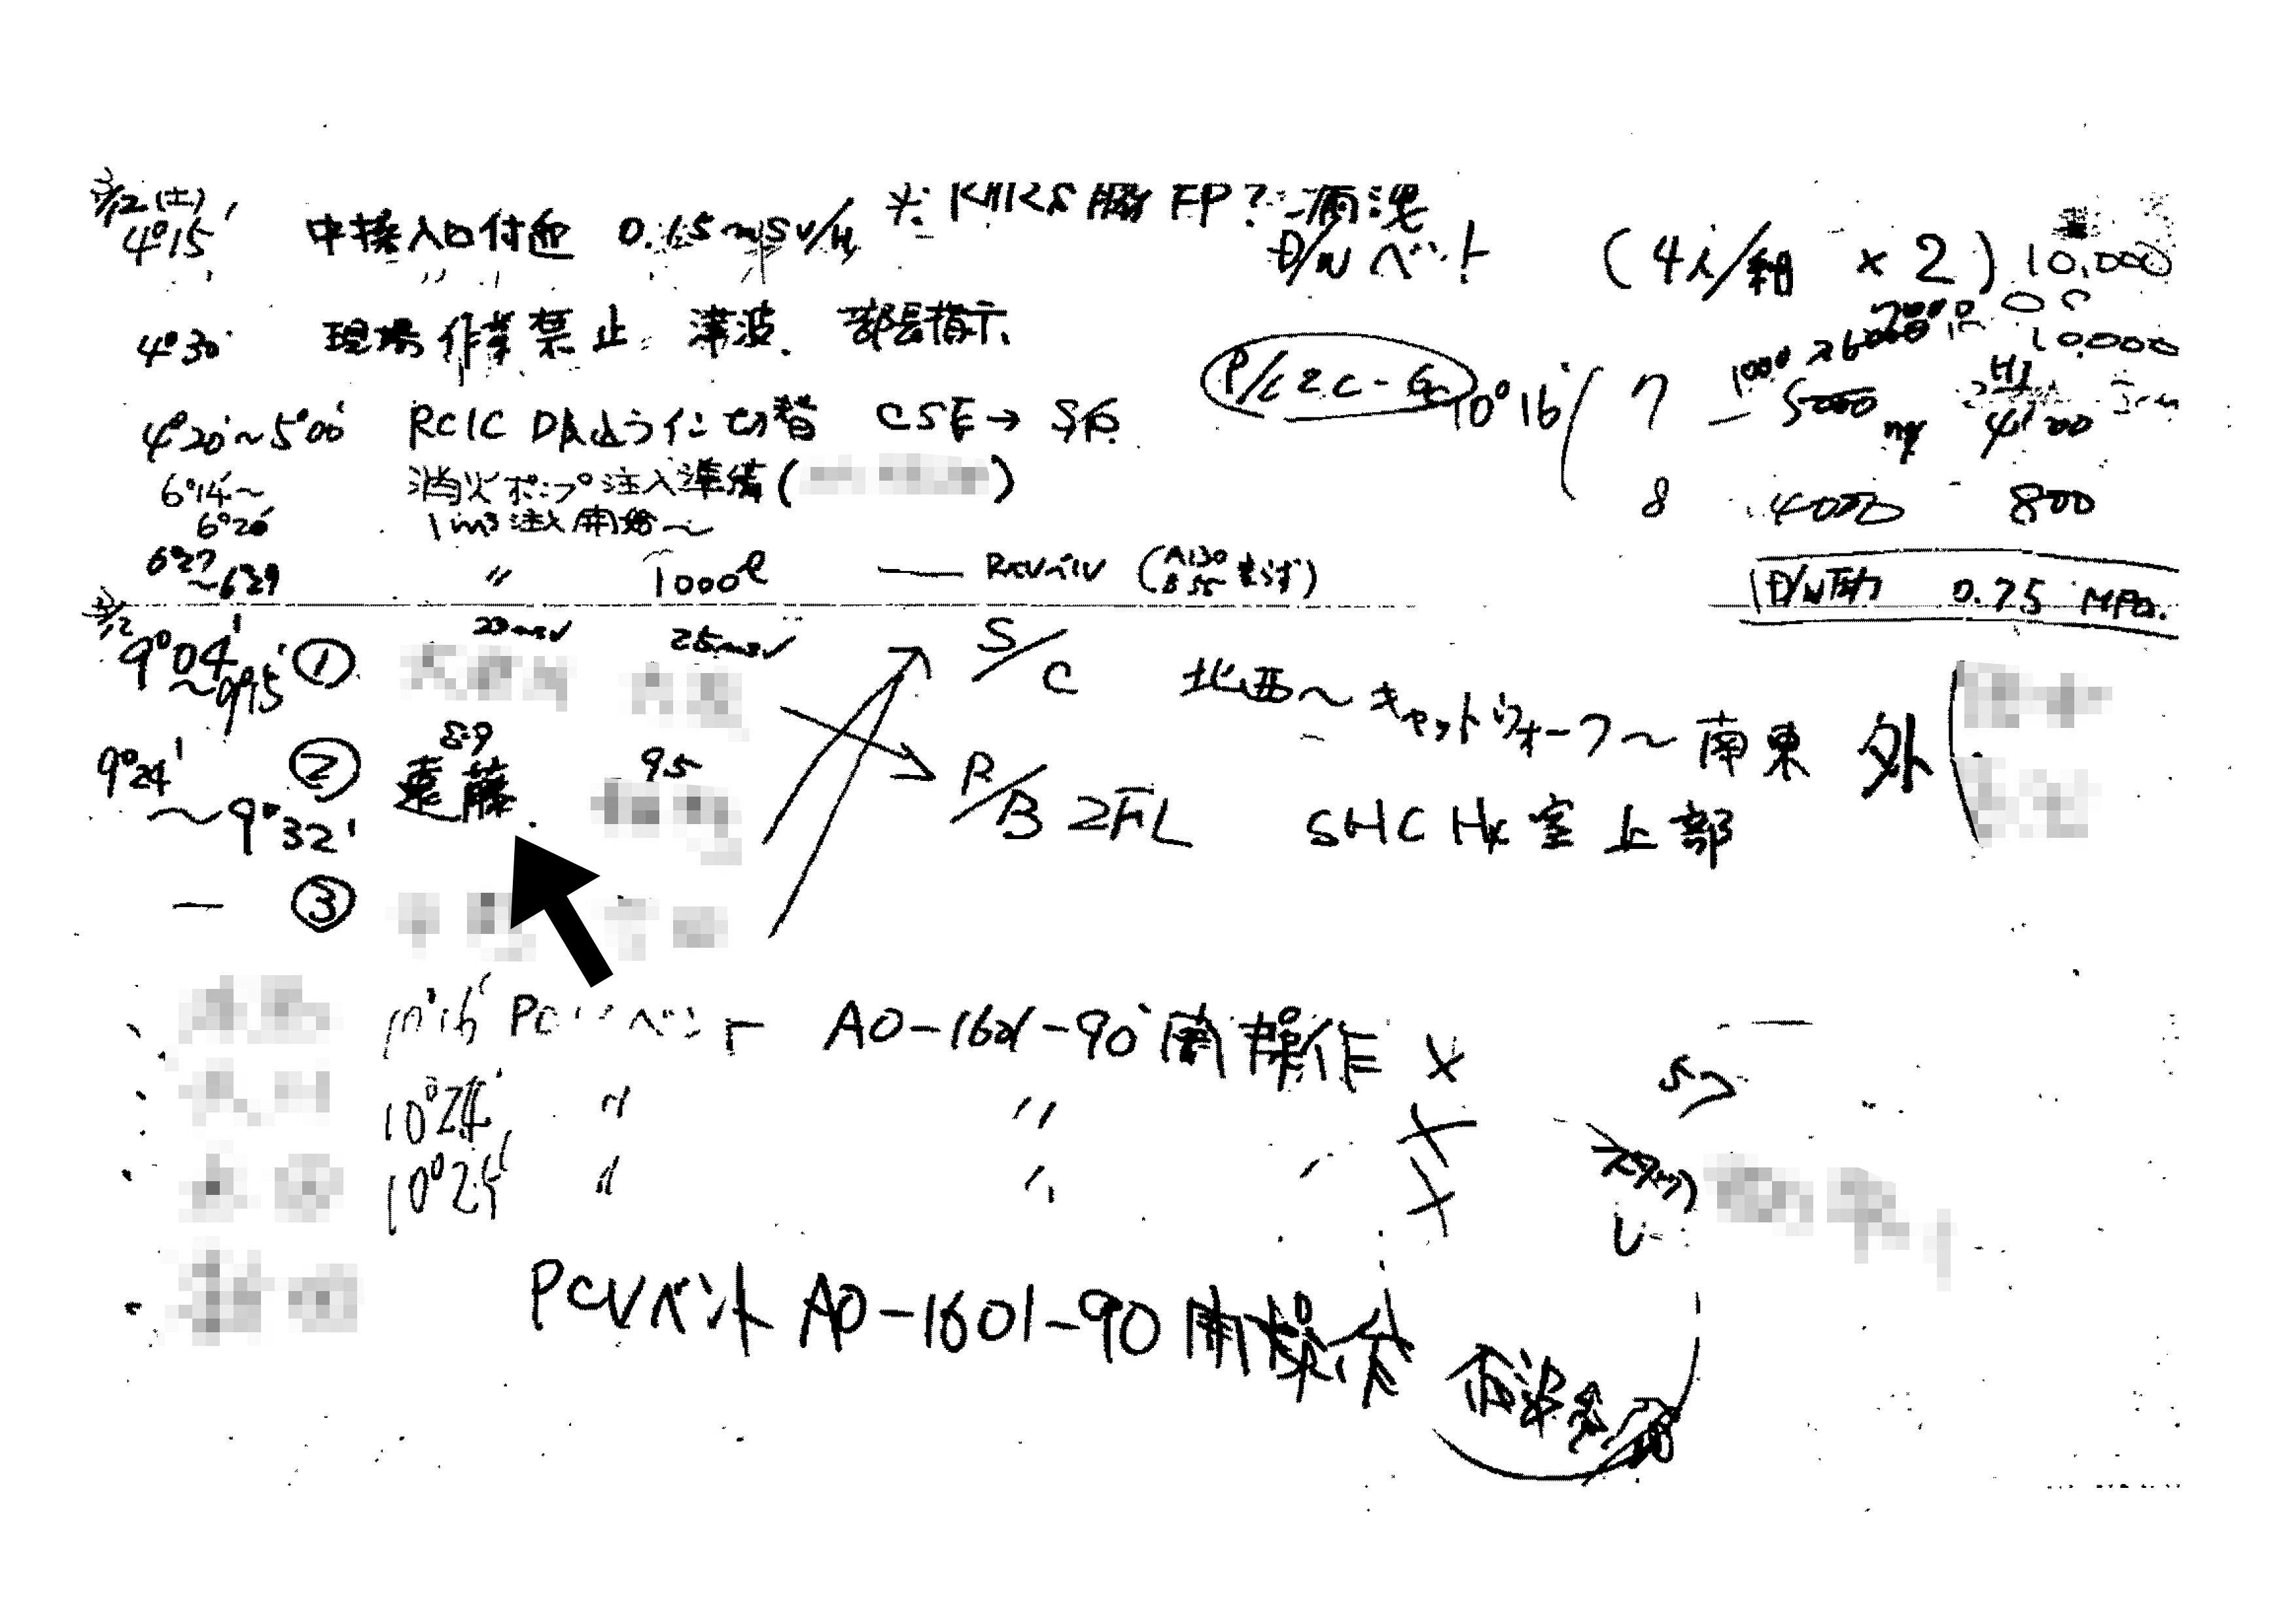 Tokyo Electric Power Co. workers at Fukushima No. 1 scribbled details of the venting operations for reactor 1 on March 12, 2011, in this photo provided by a Tepco employee. | KYODO